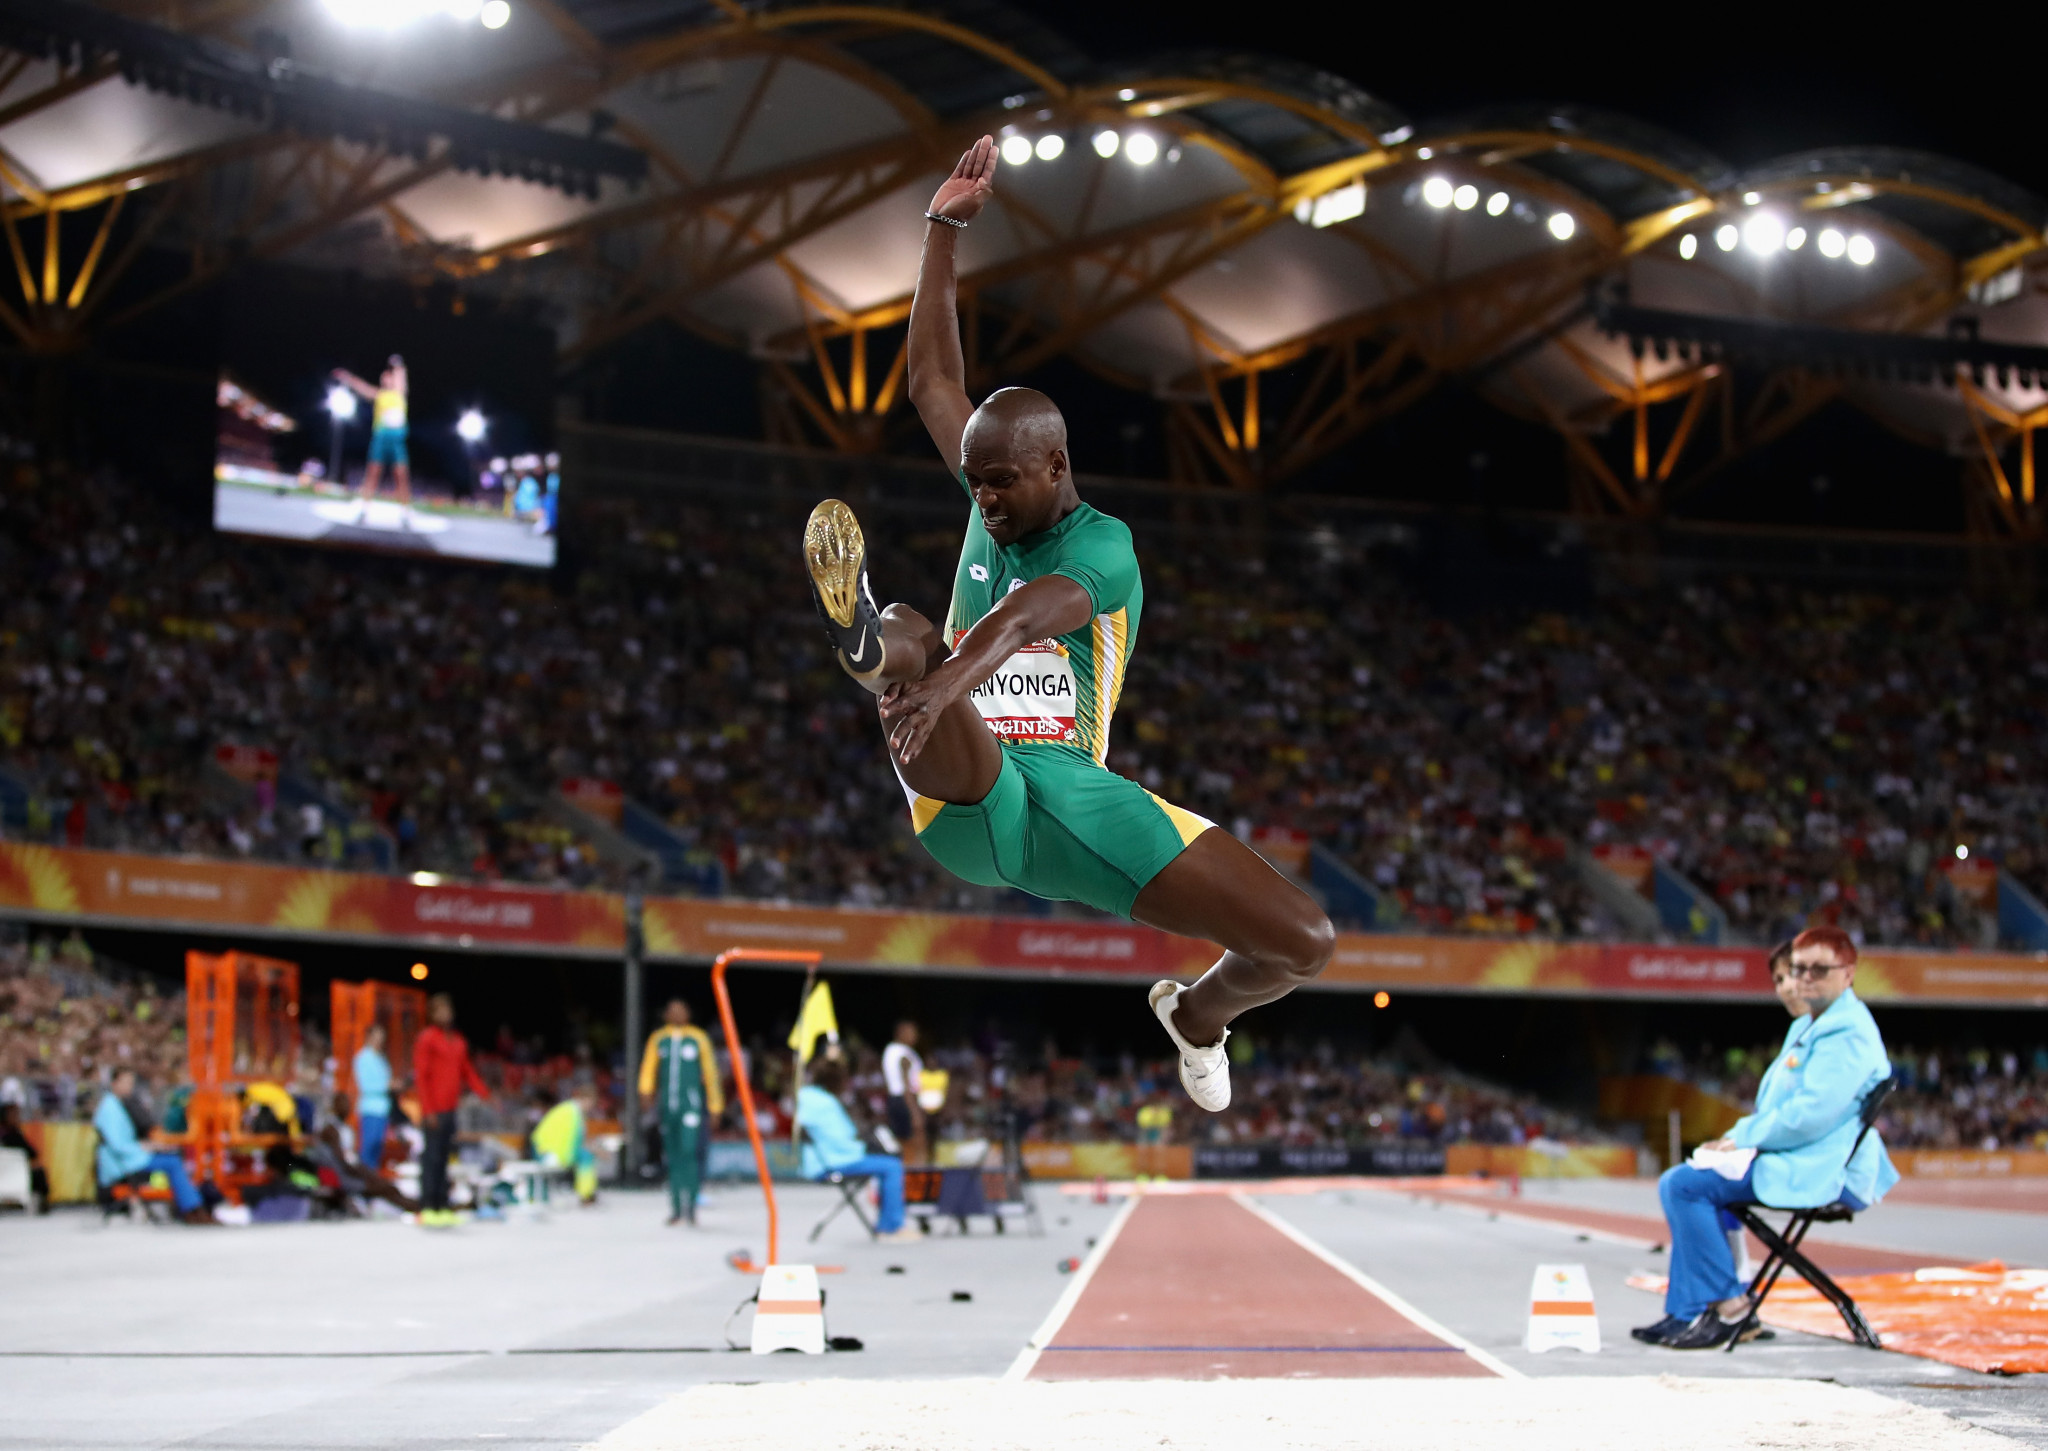 Luvo Manyonga twice broke the Games record in the men's long jump ©Getty Images